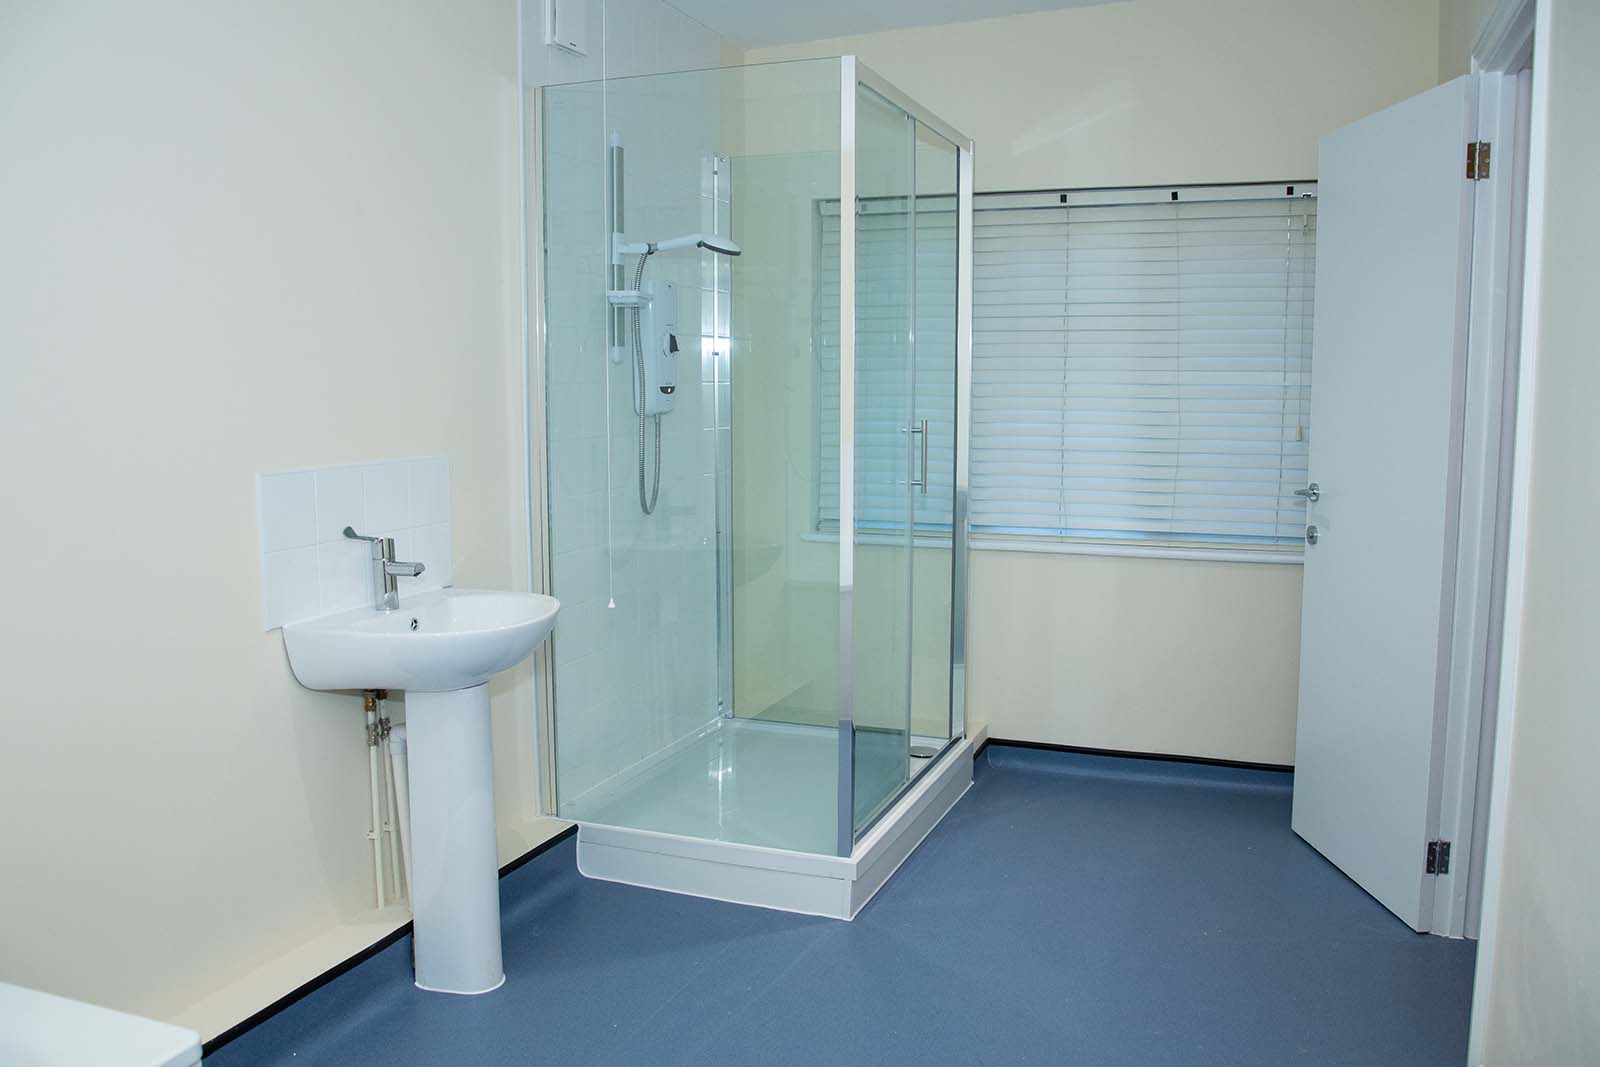 A bathroom with a glass door shower, sink and a window